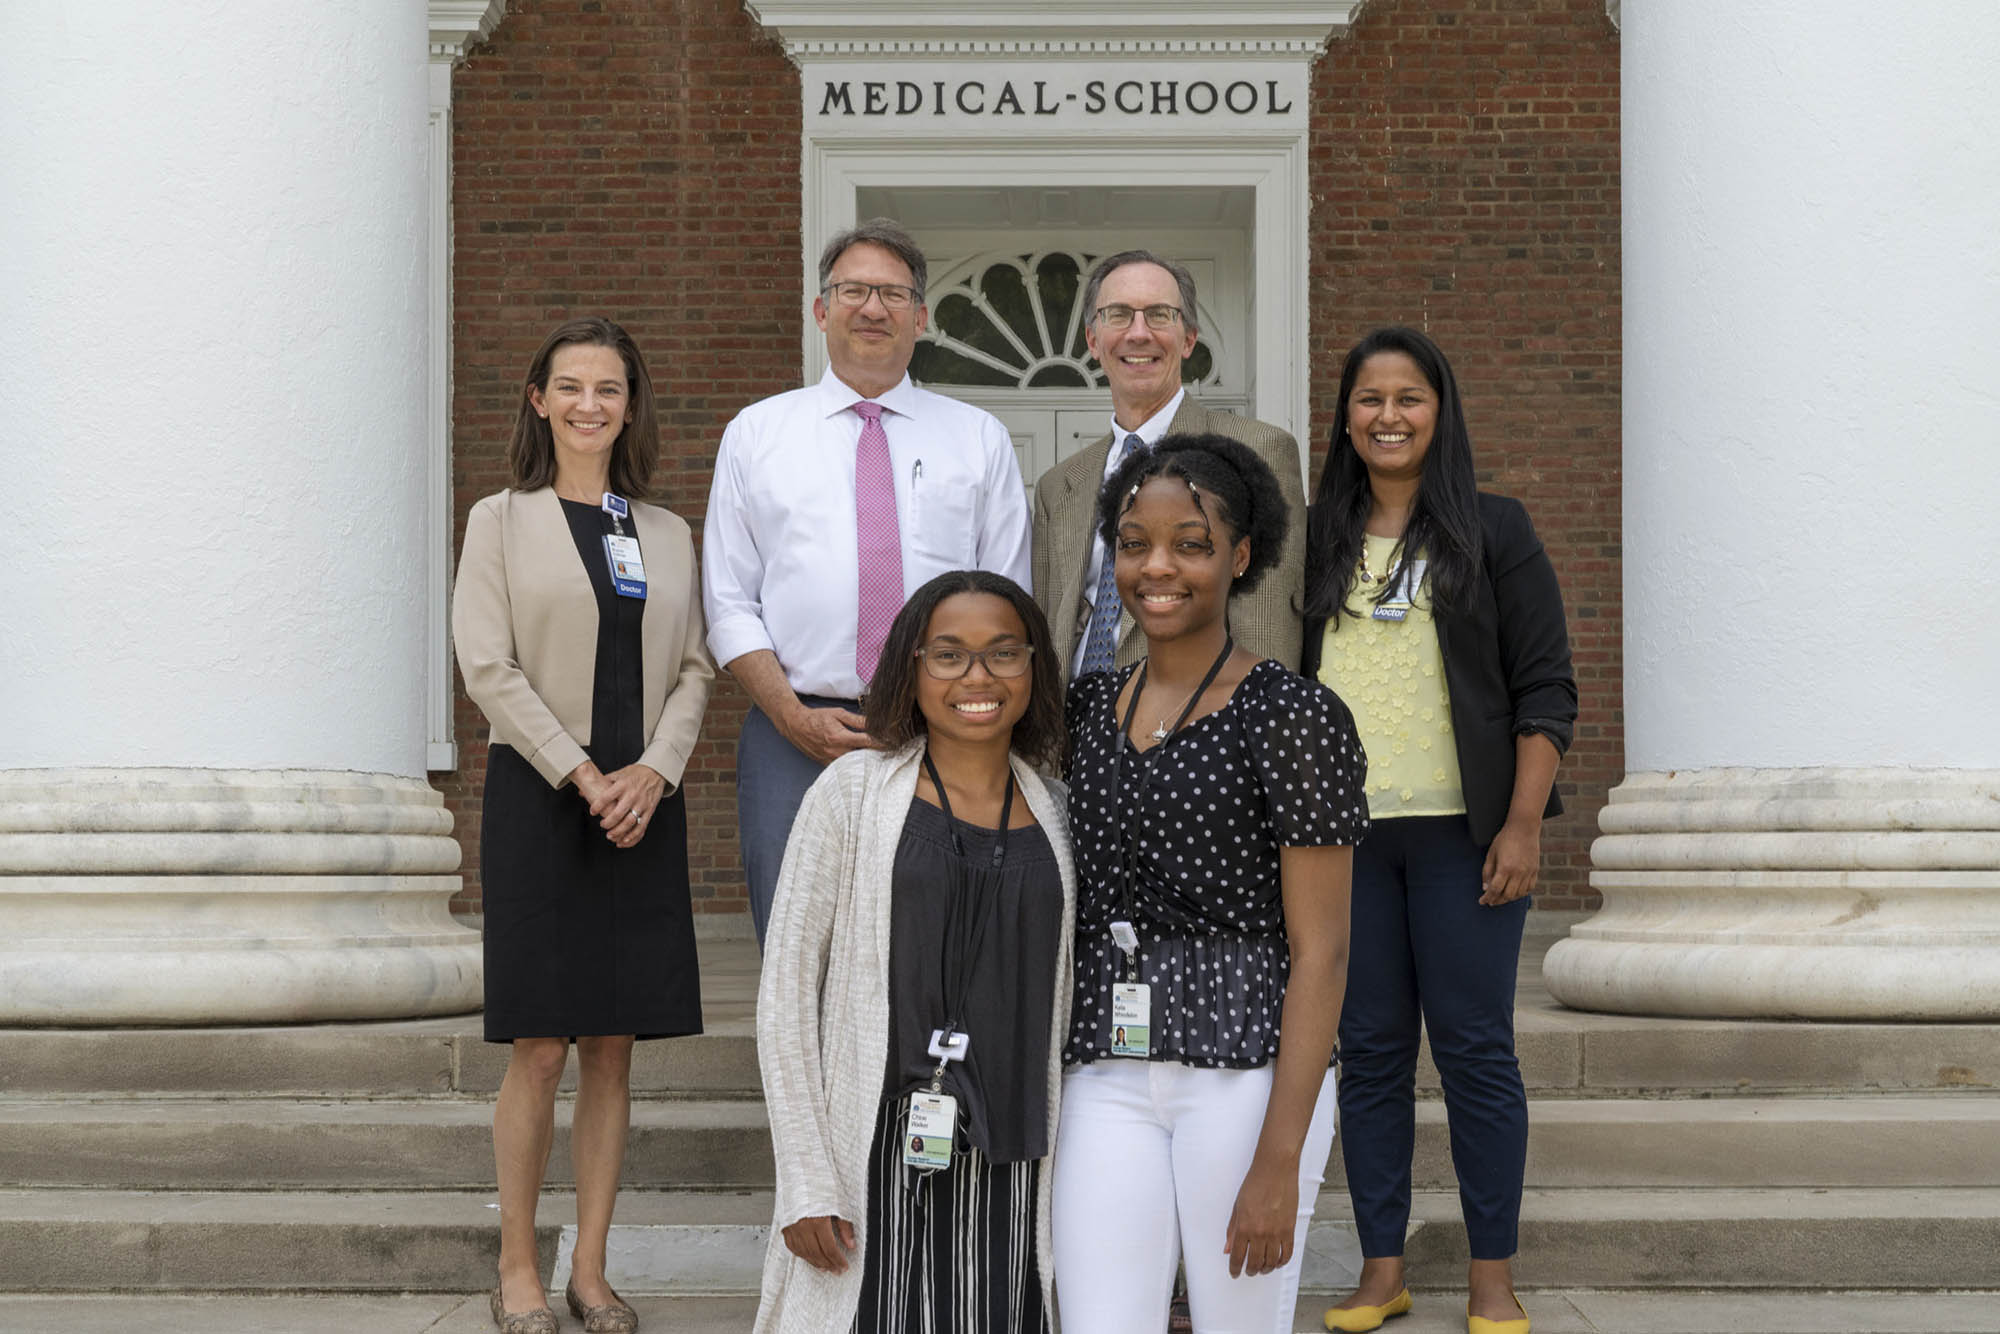 front row left to right, Chloe Walker KaTia Whindleton, Second row left to right: Drs. Brynne Sullivan, Howard Goodkin, Reid Adams, and Sana Syed